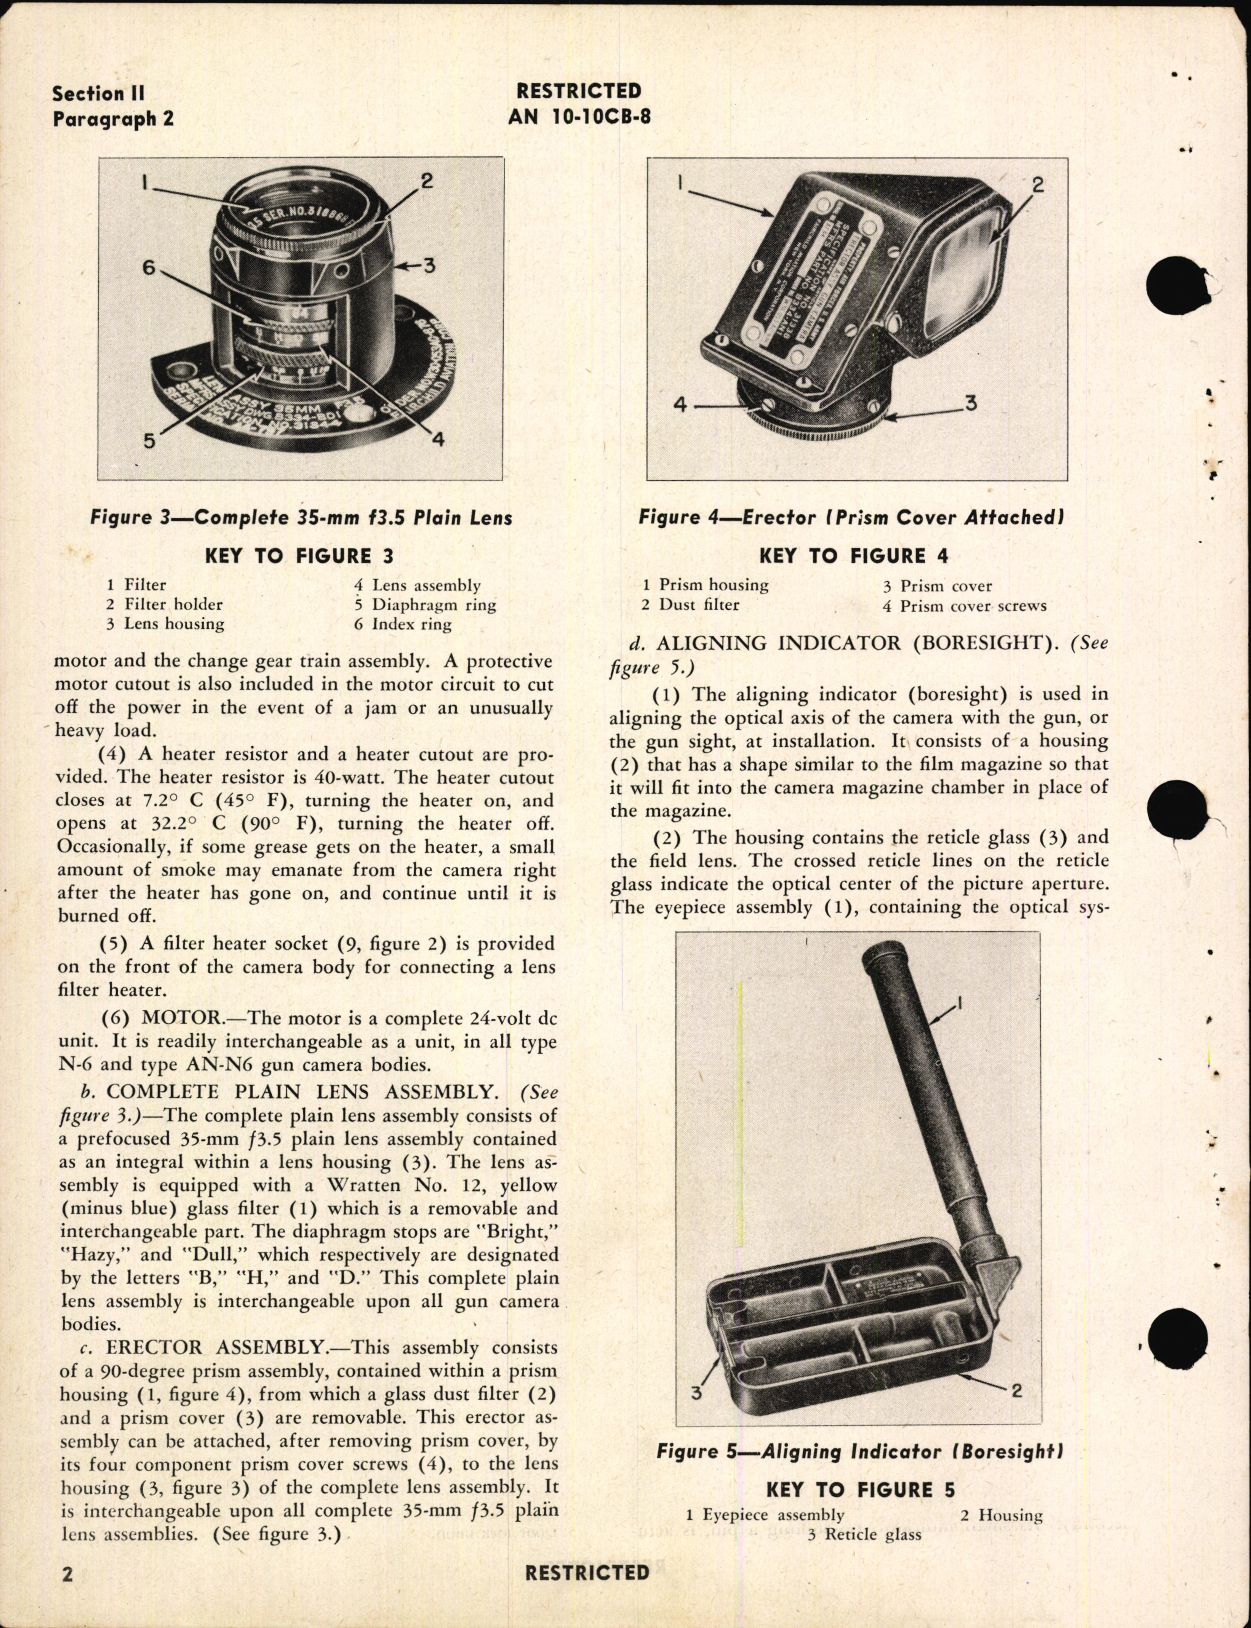 Sample page 6 from AirCorps Library document: Handbook of Instructions with Parts Catalog for N-6 and AN-N6 Gun Cameras